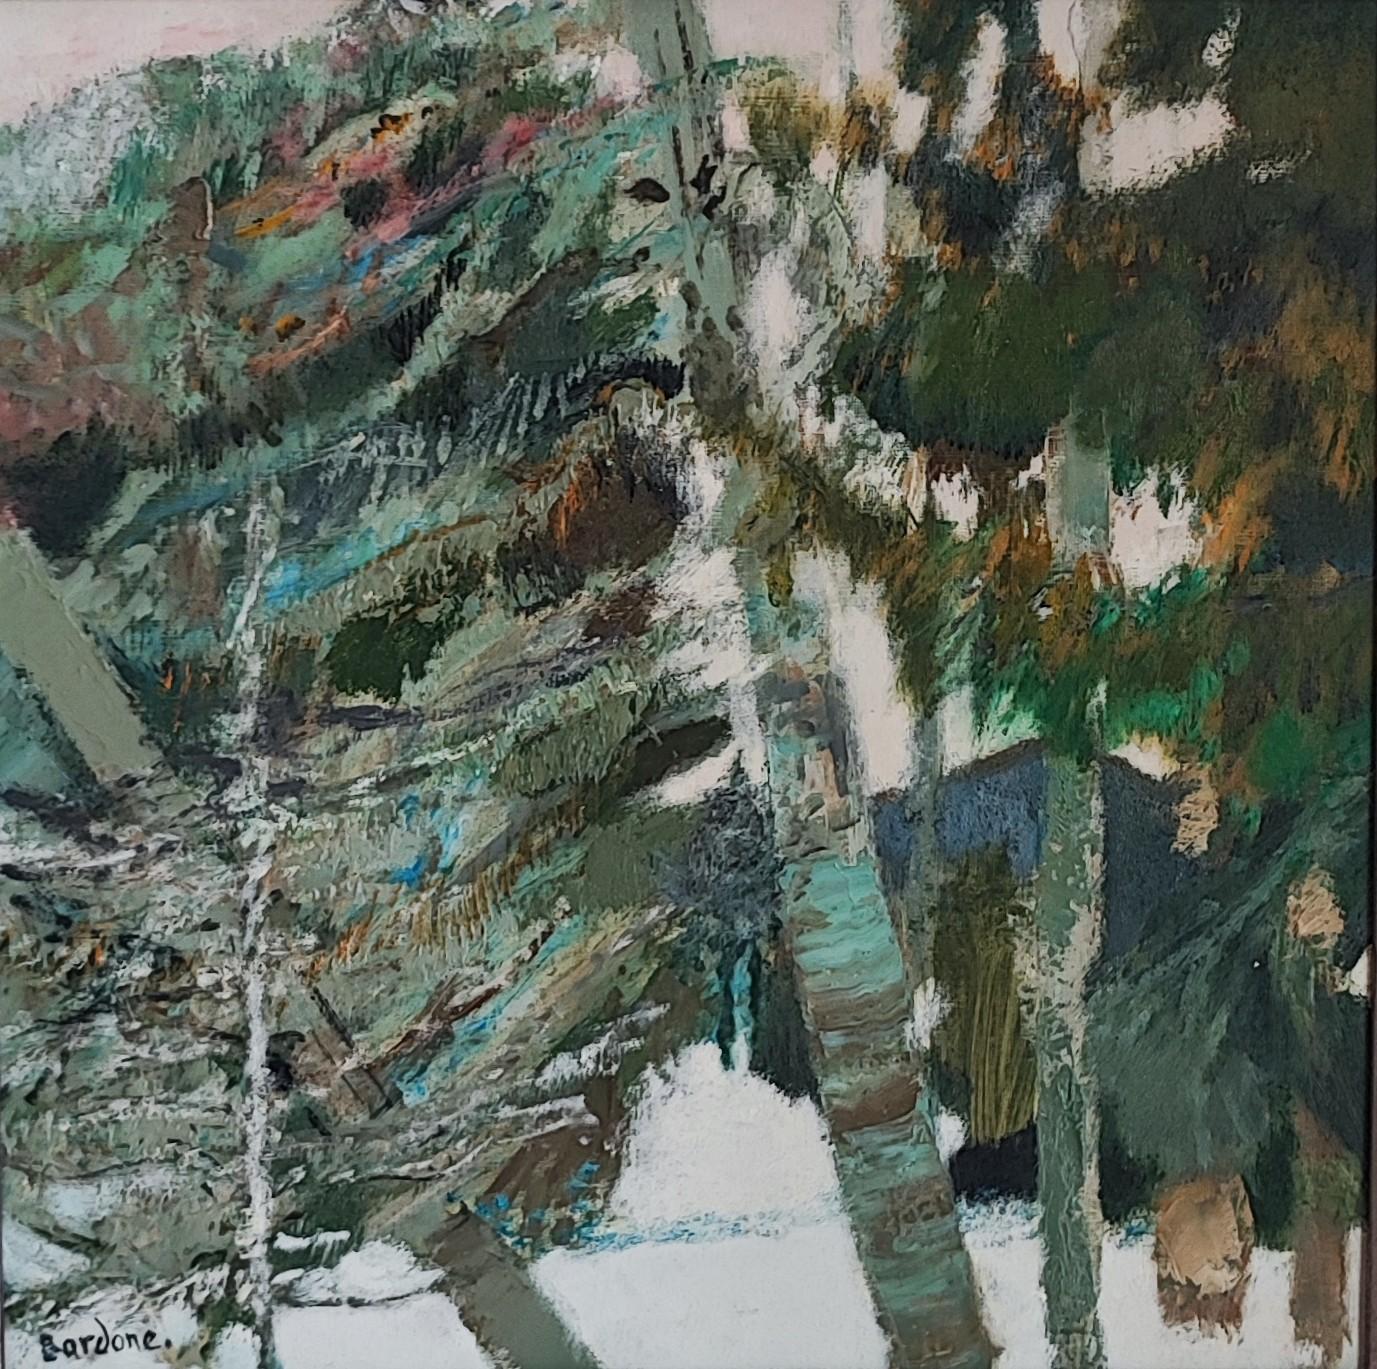 Landscape Painting Guy Bardone - The incines-Anzere pines